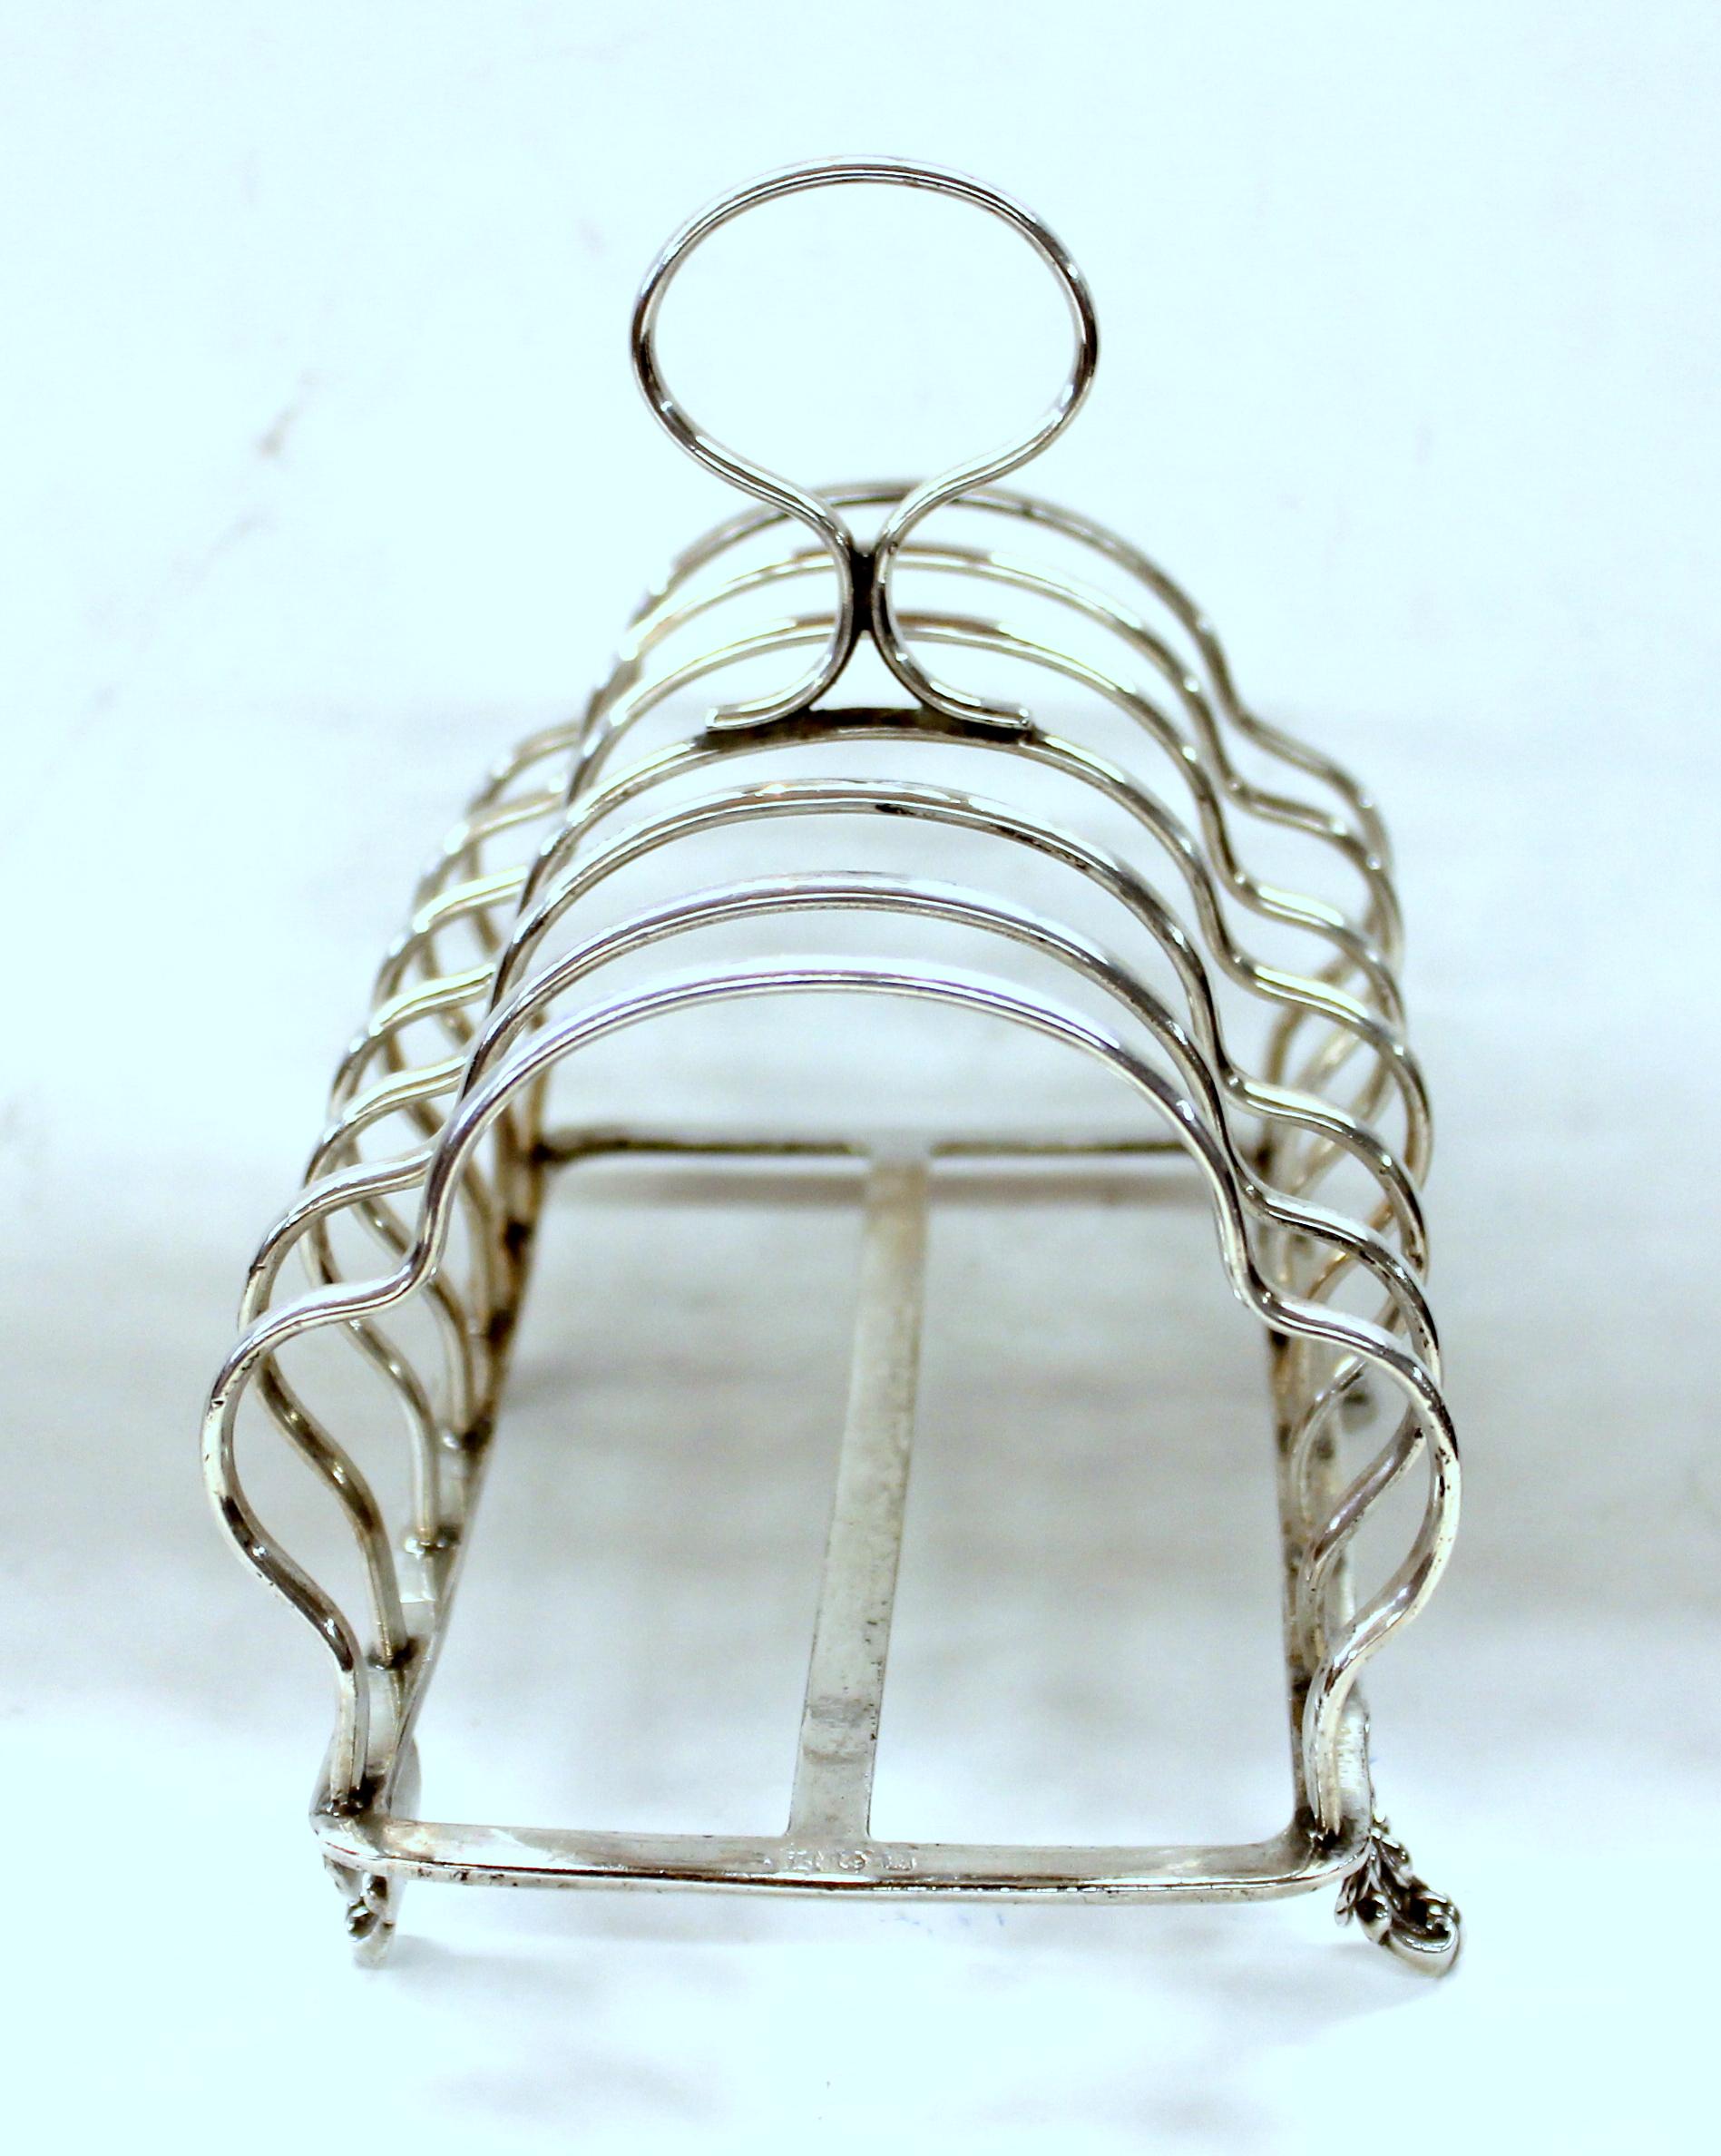 19th Century Superb English Silver Plate Seven-Bar Toast or Letter Rack on Lovely Cast Feet